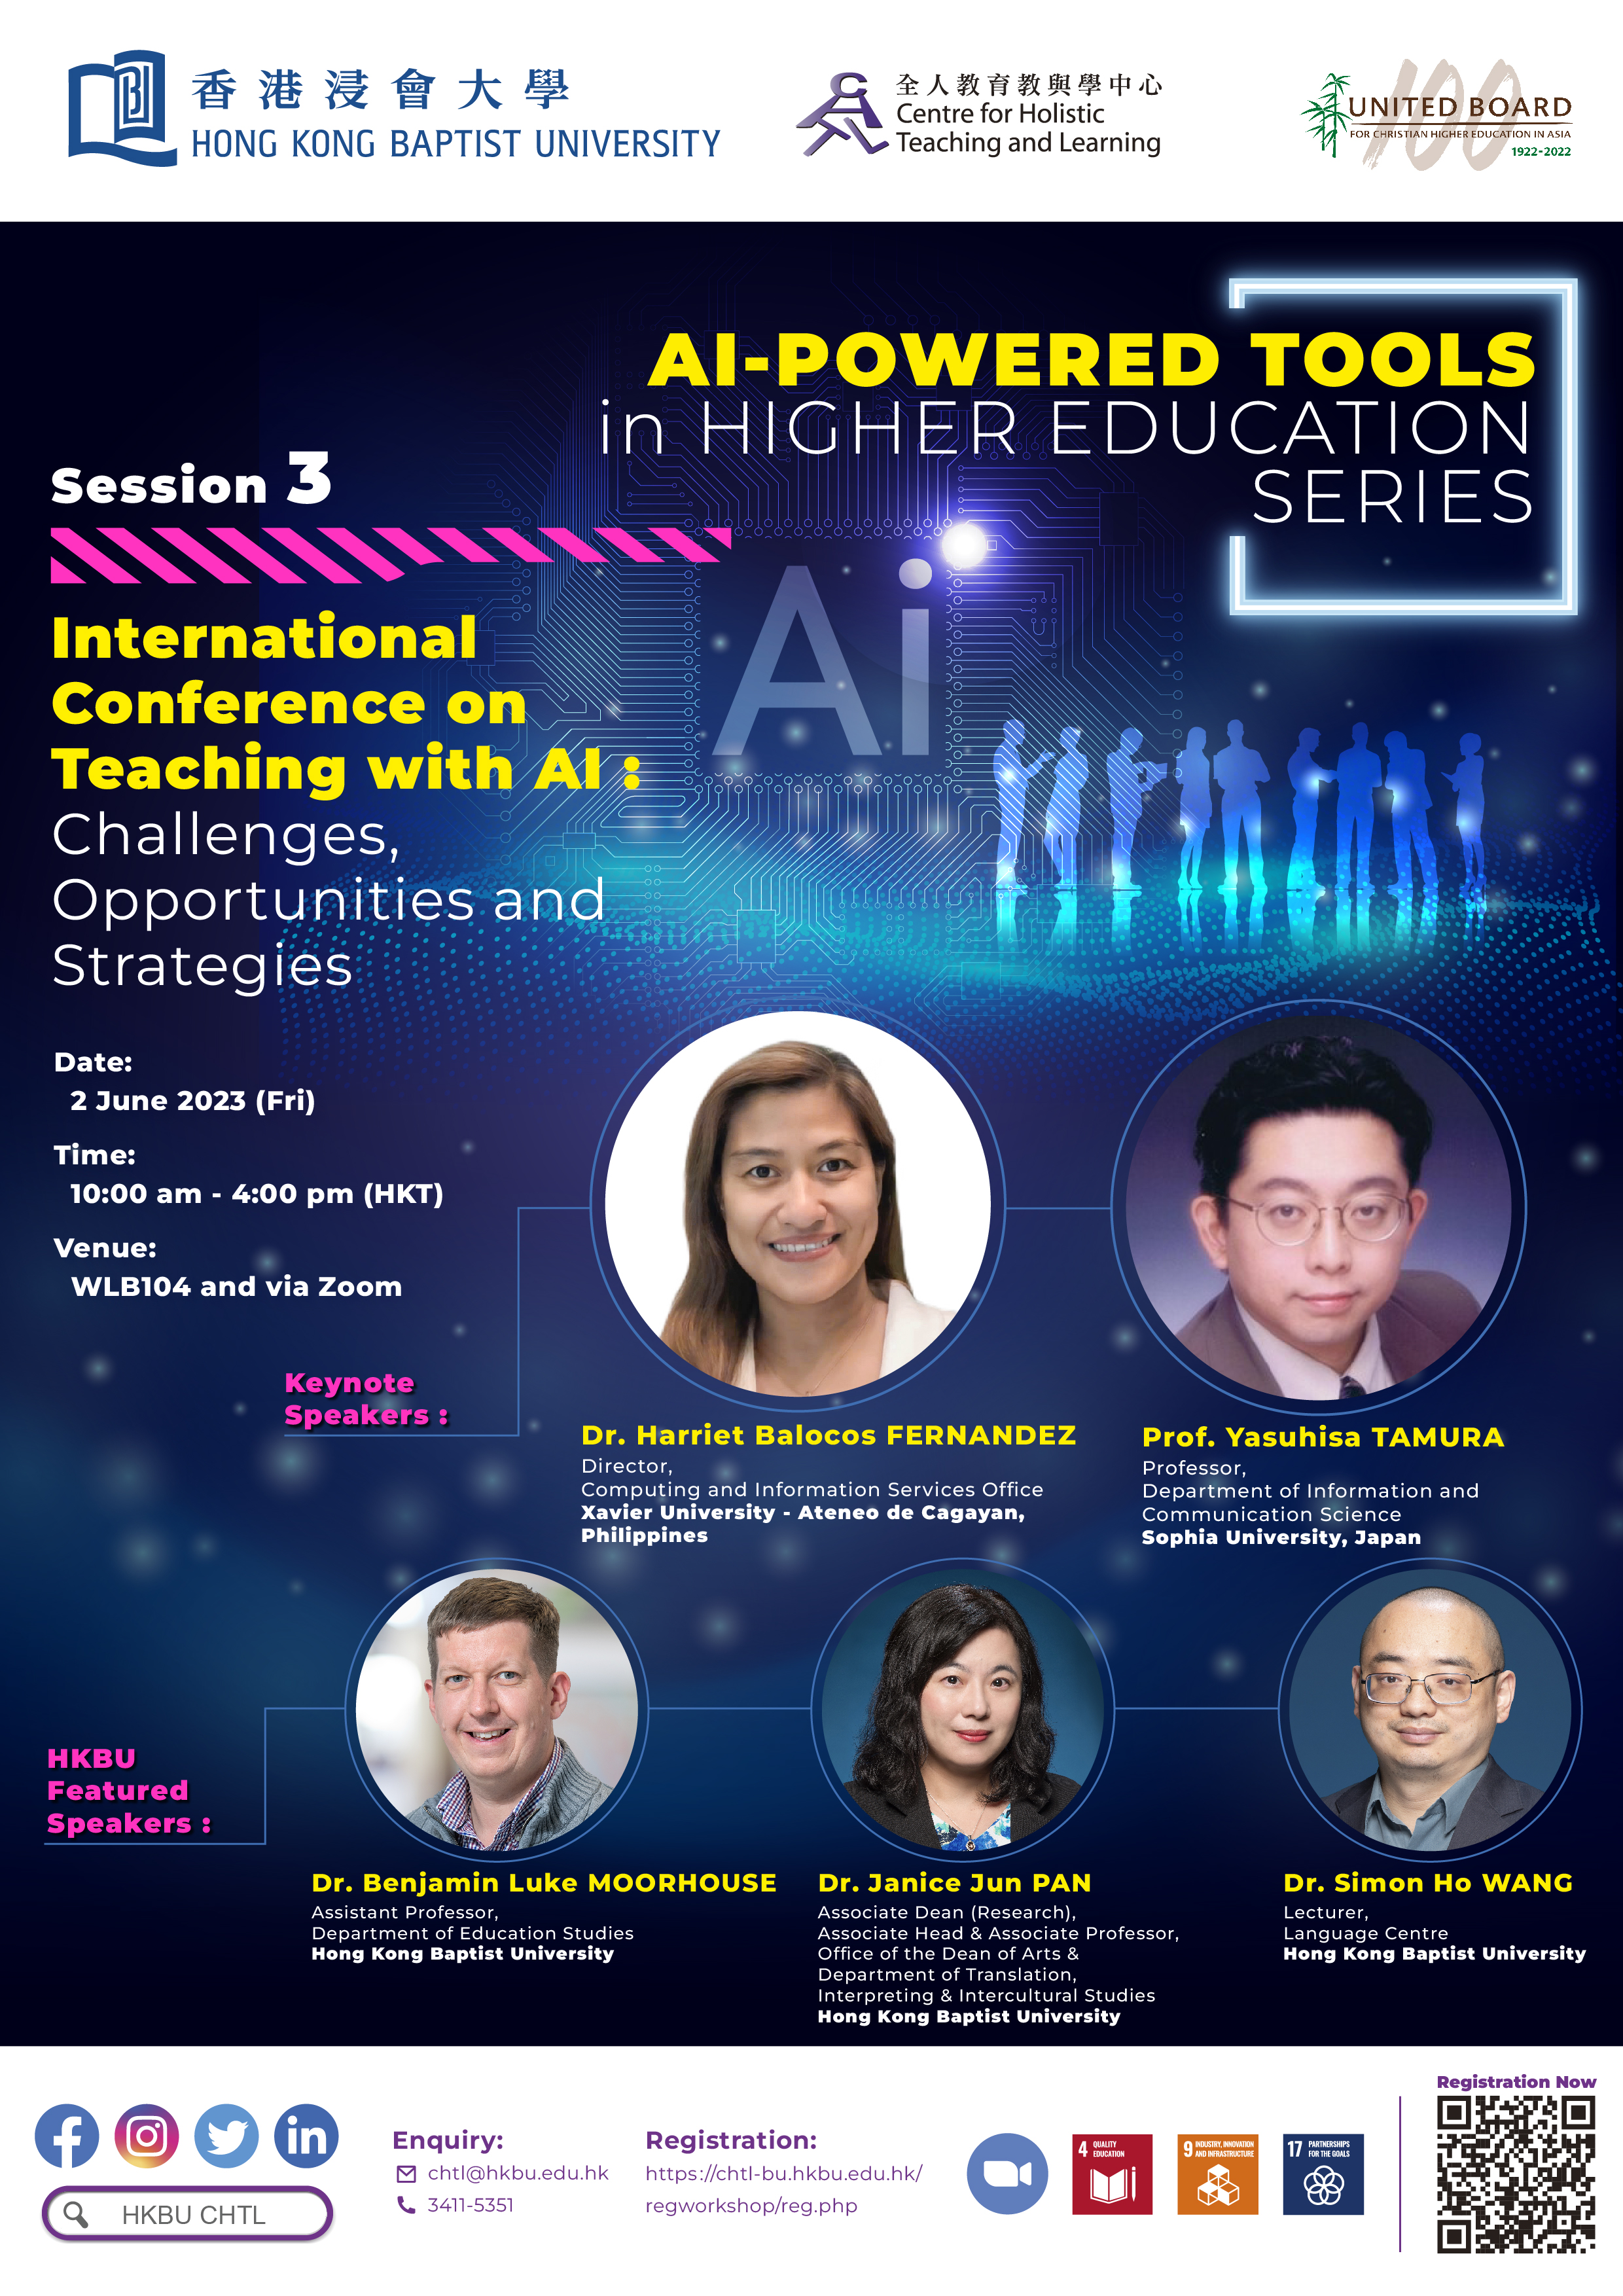 International Conference on Teaching with AI: Challenges, Opportunities & Strategies